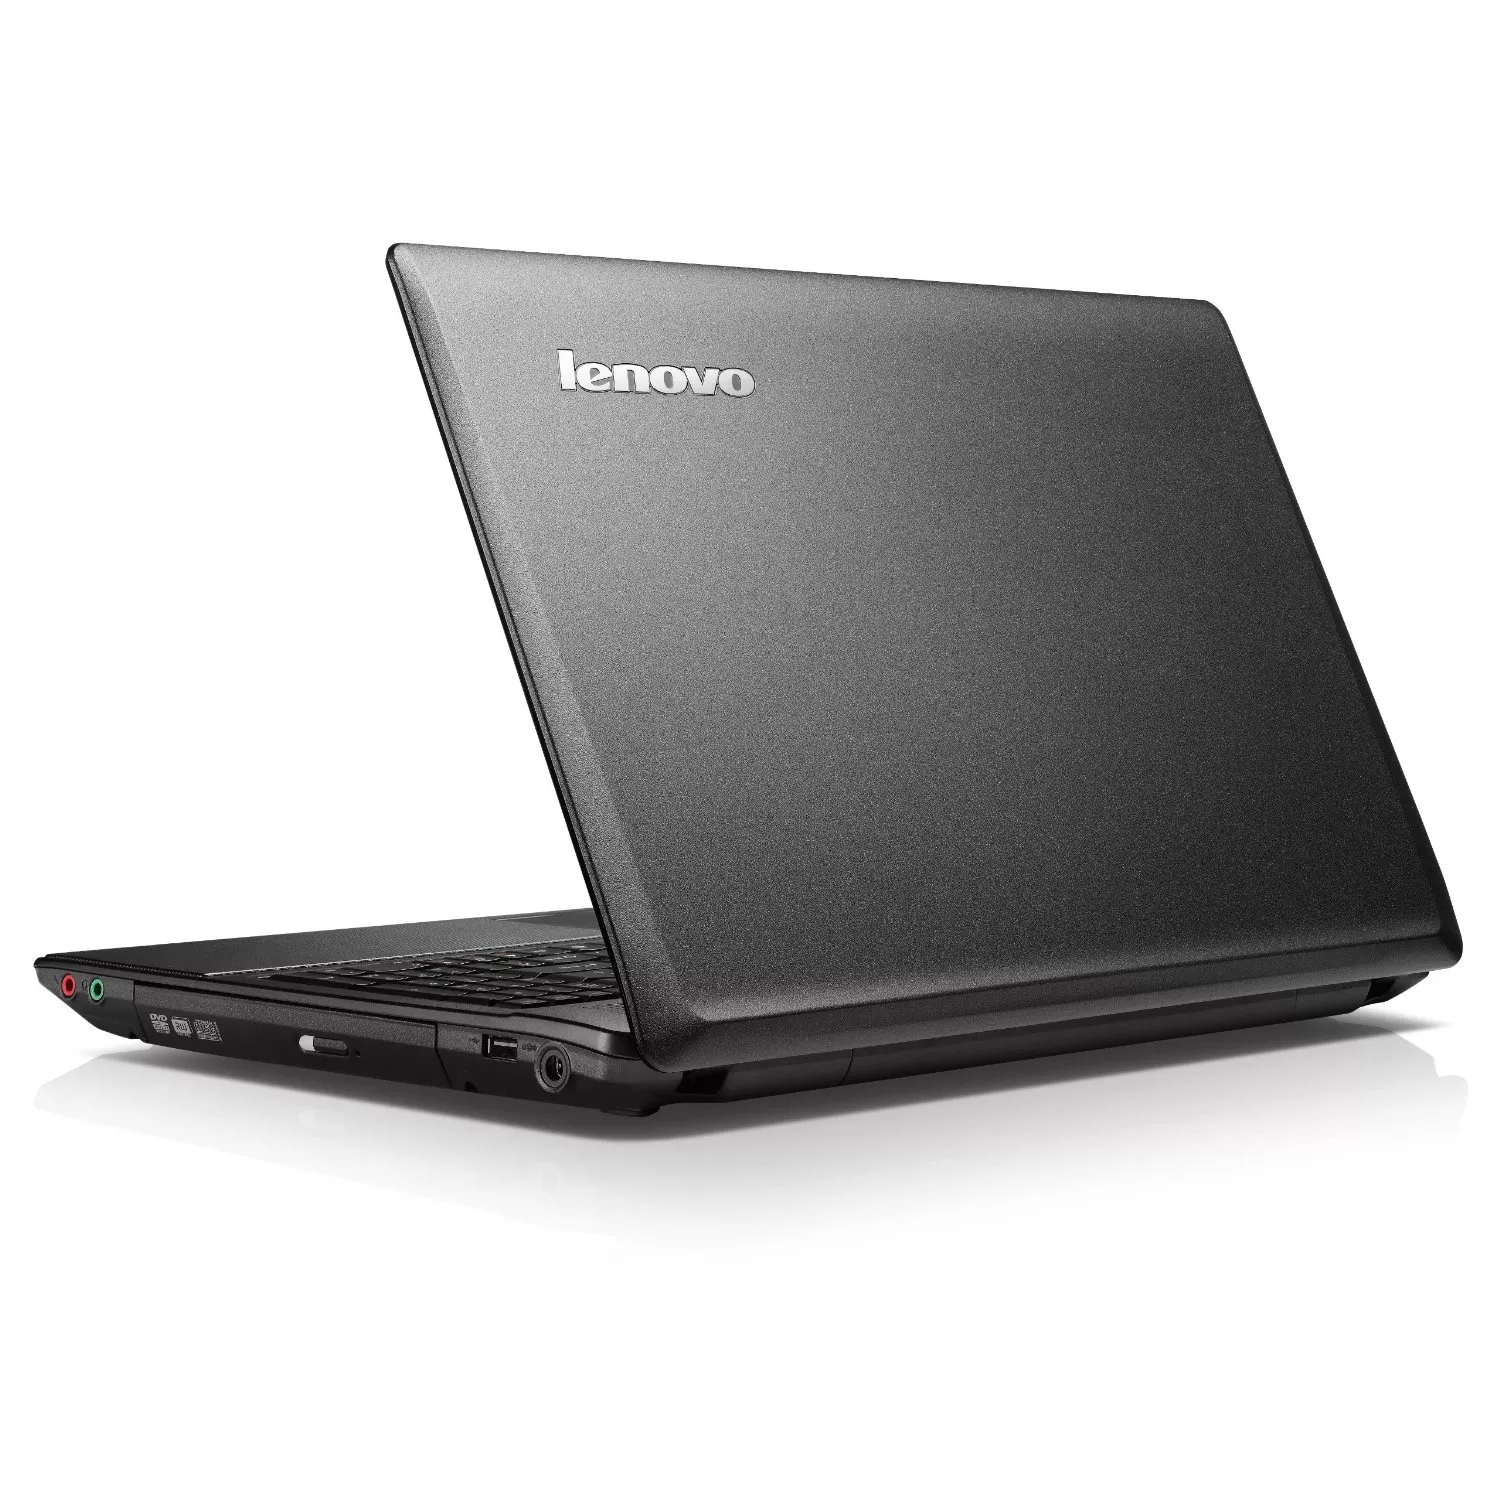 https://www.xgamertechnologies.com/images/products/Lenovo G560 core i3 2.4Ghz 240gb SSD Refurbished Laptop with 3 games.webp